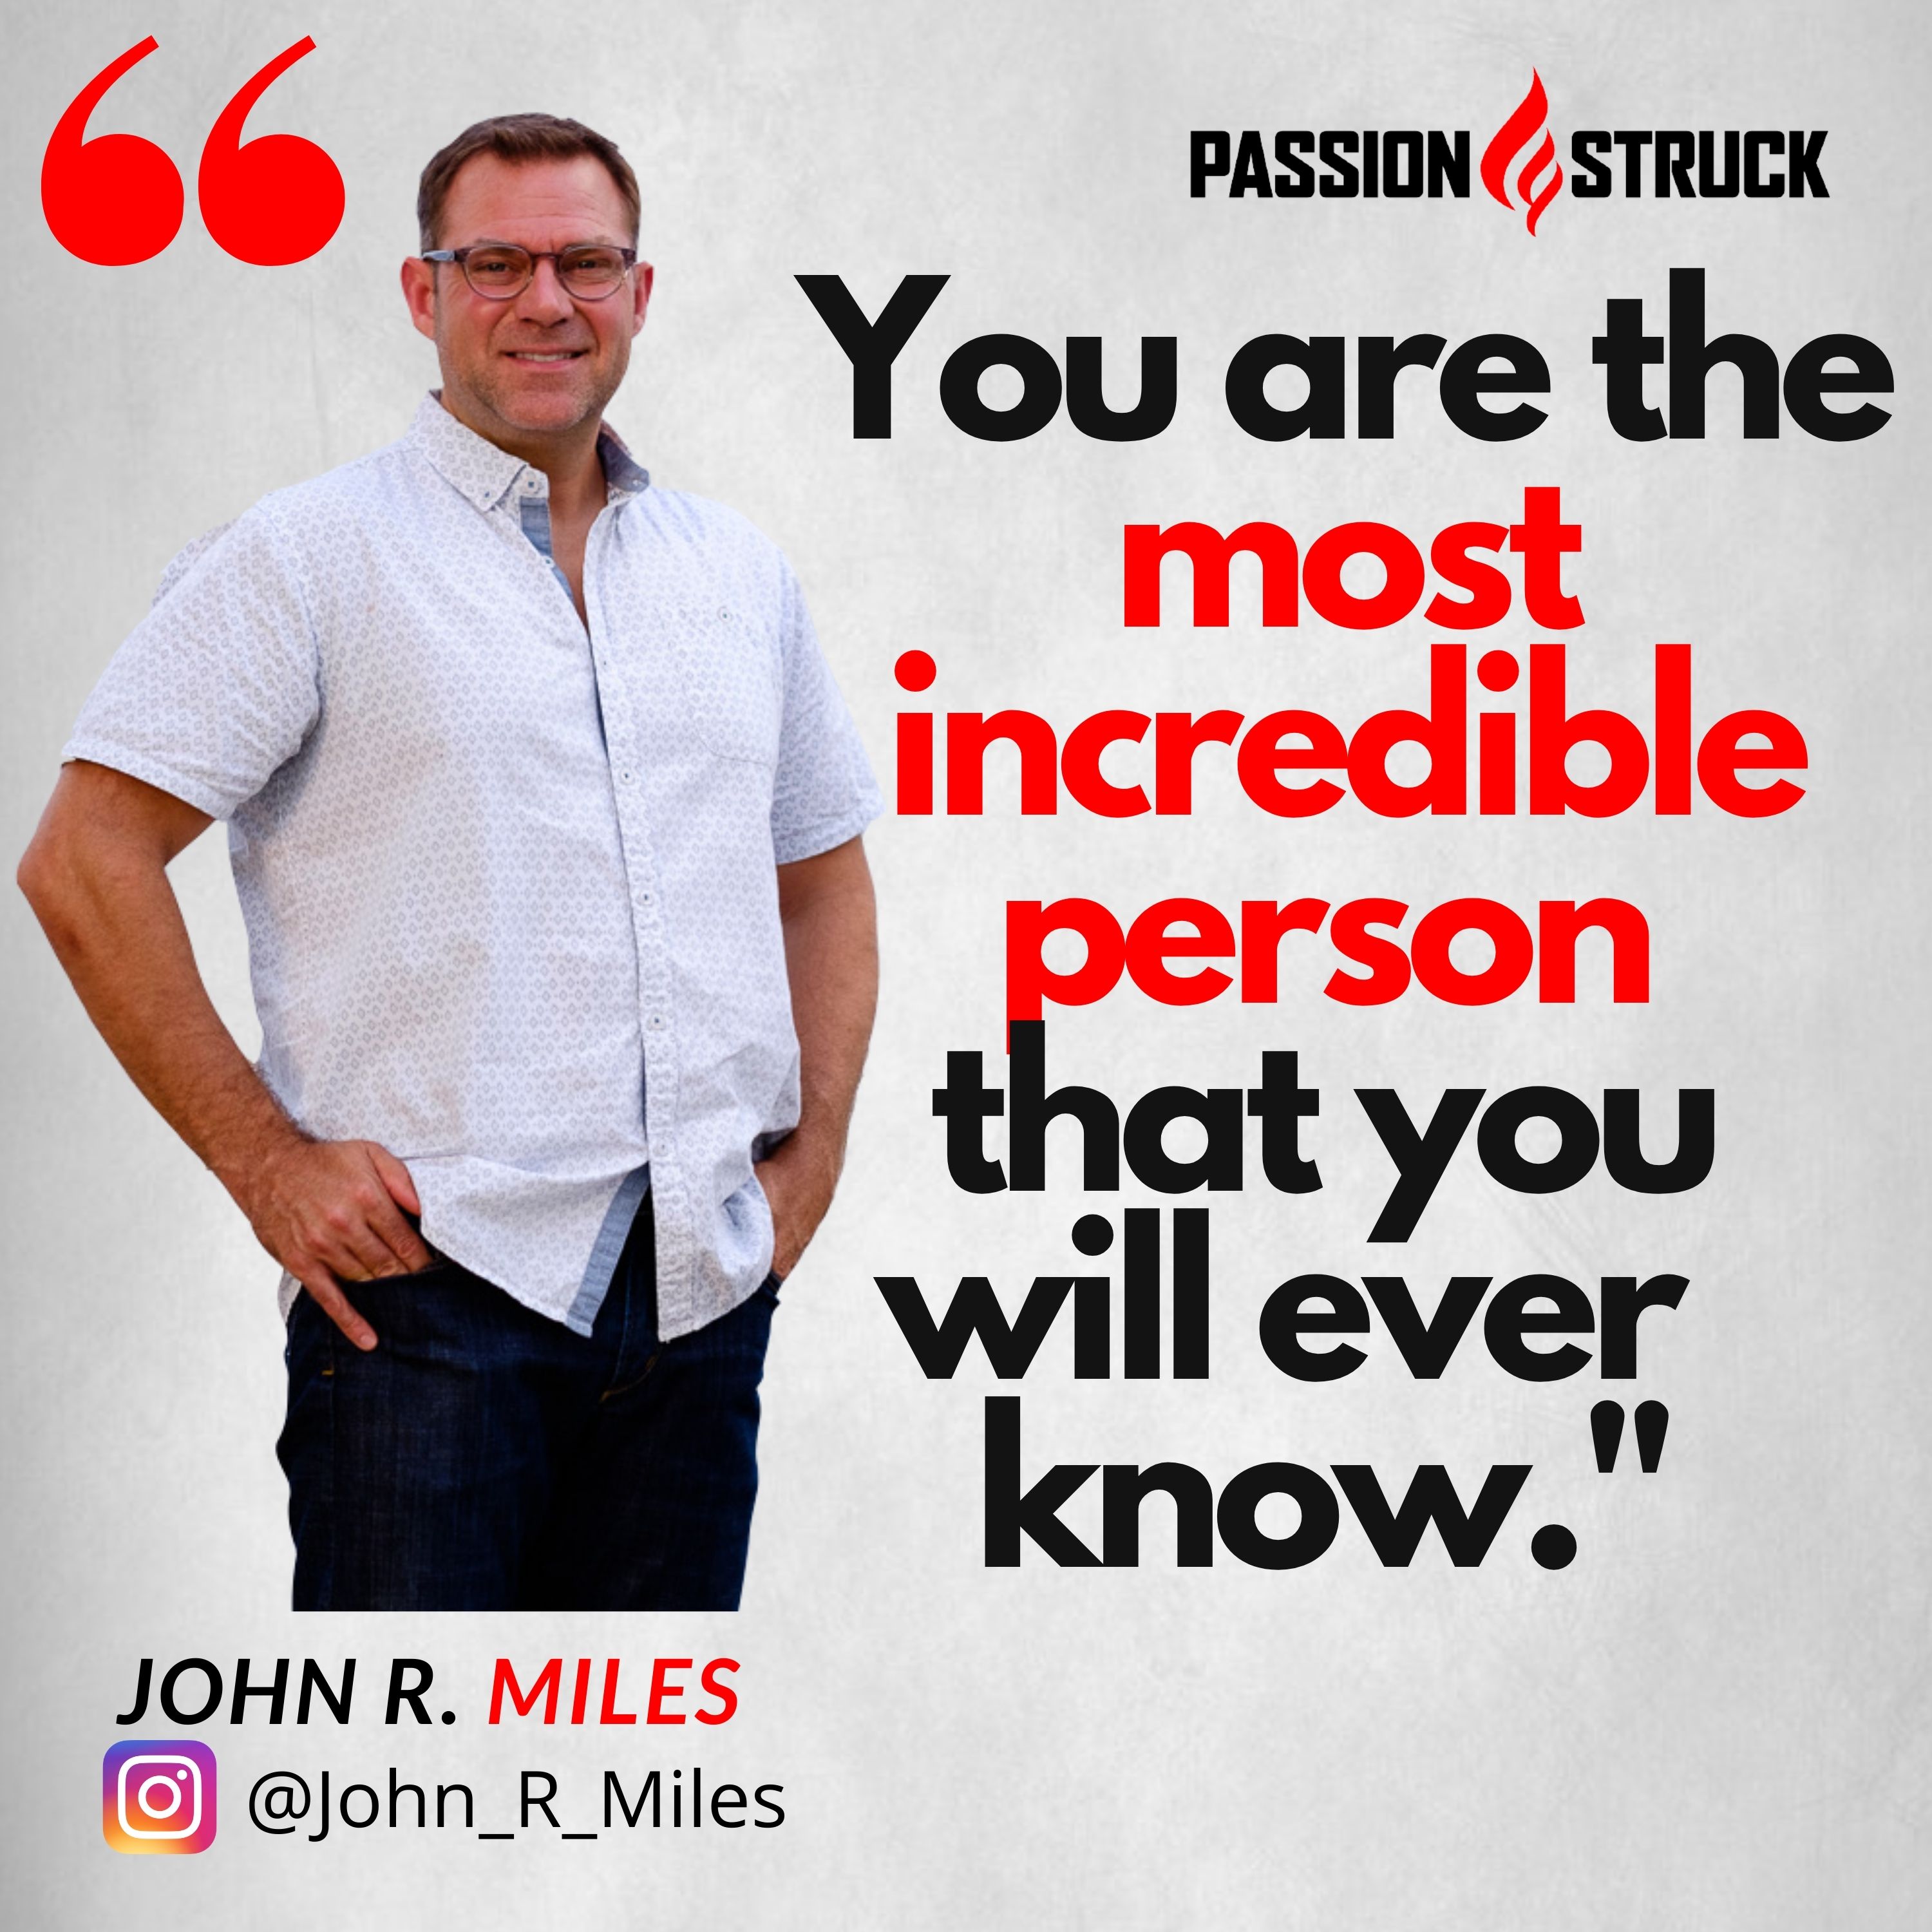 John R. Miles quote on being your best self and you are the most incredible person that you will ever know